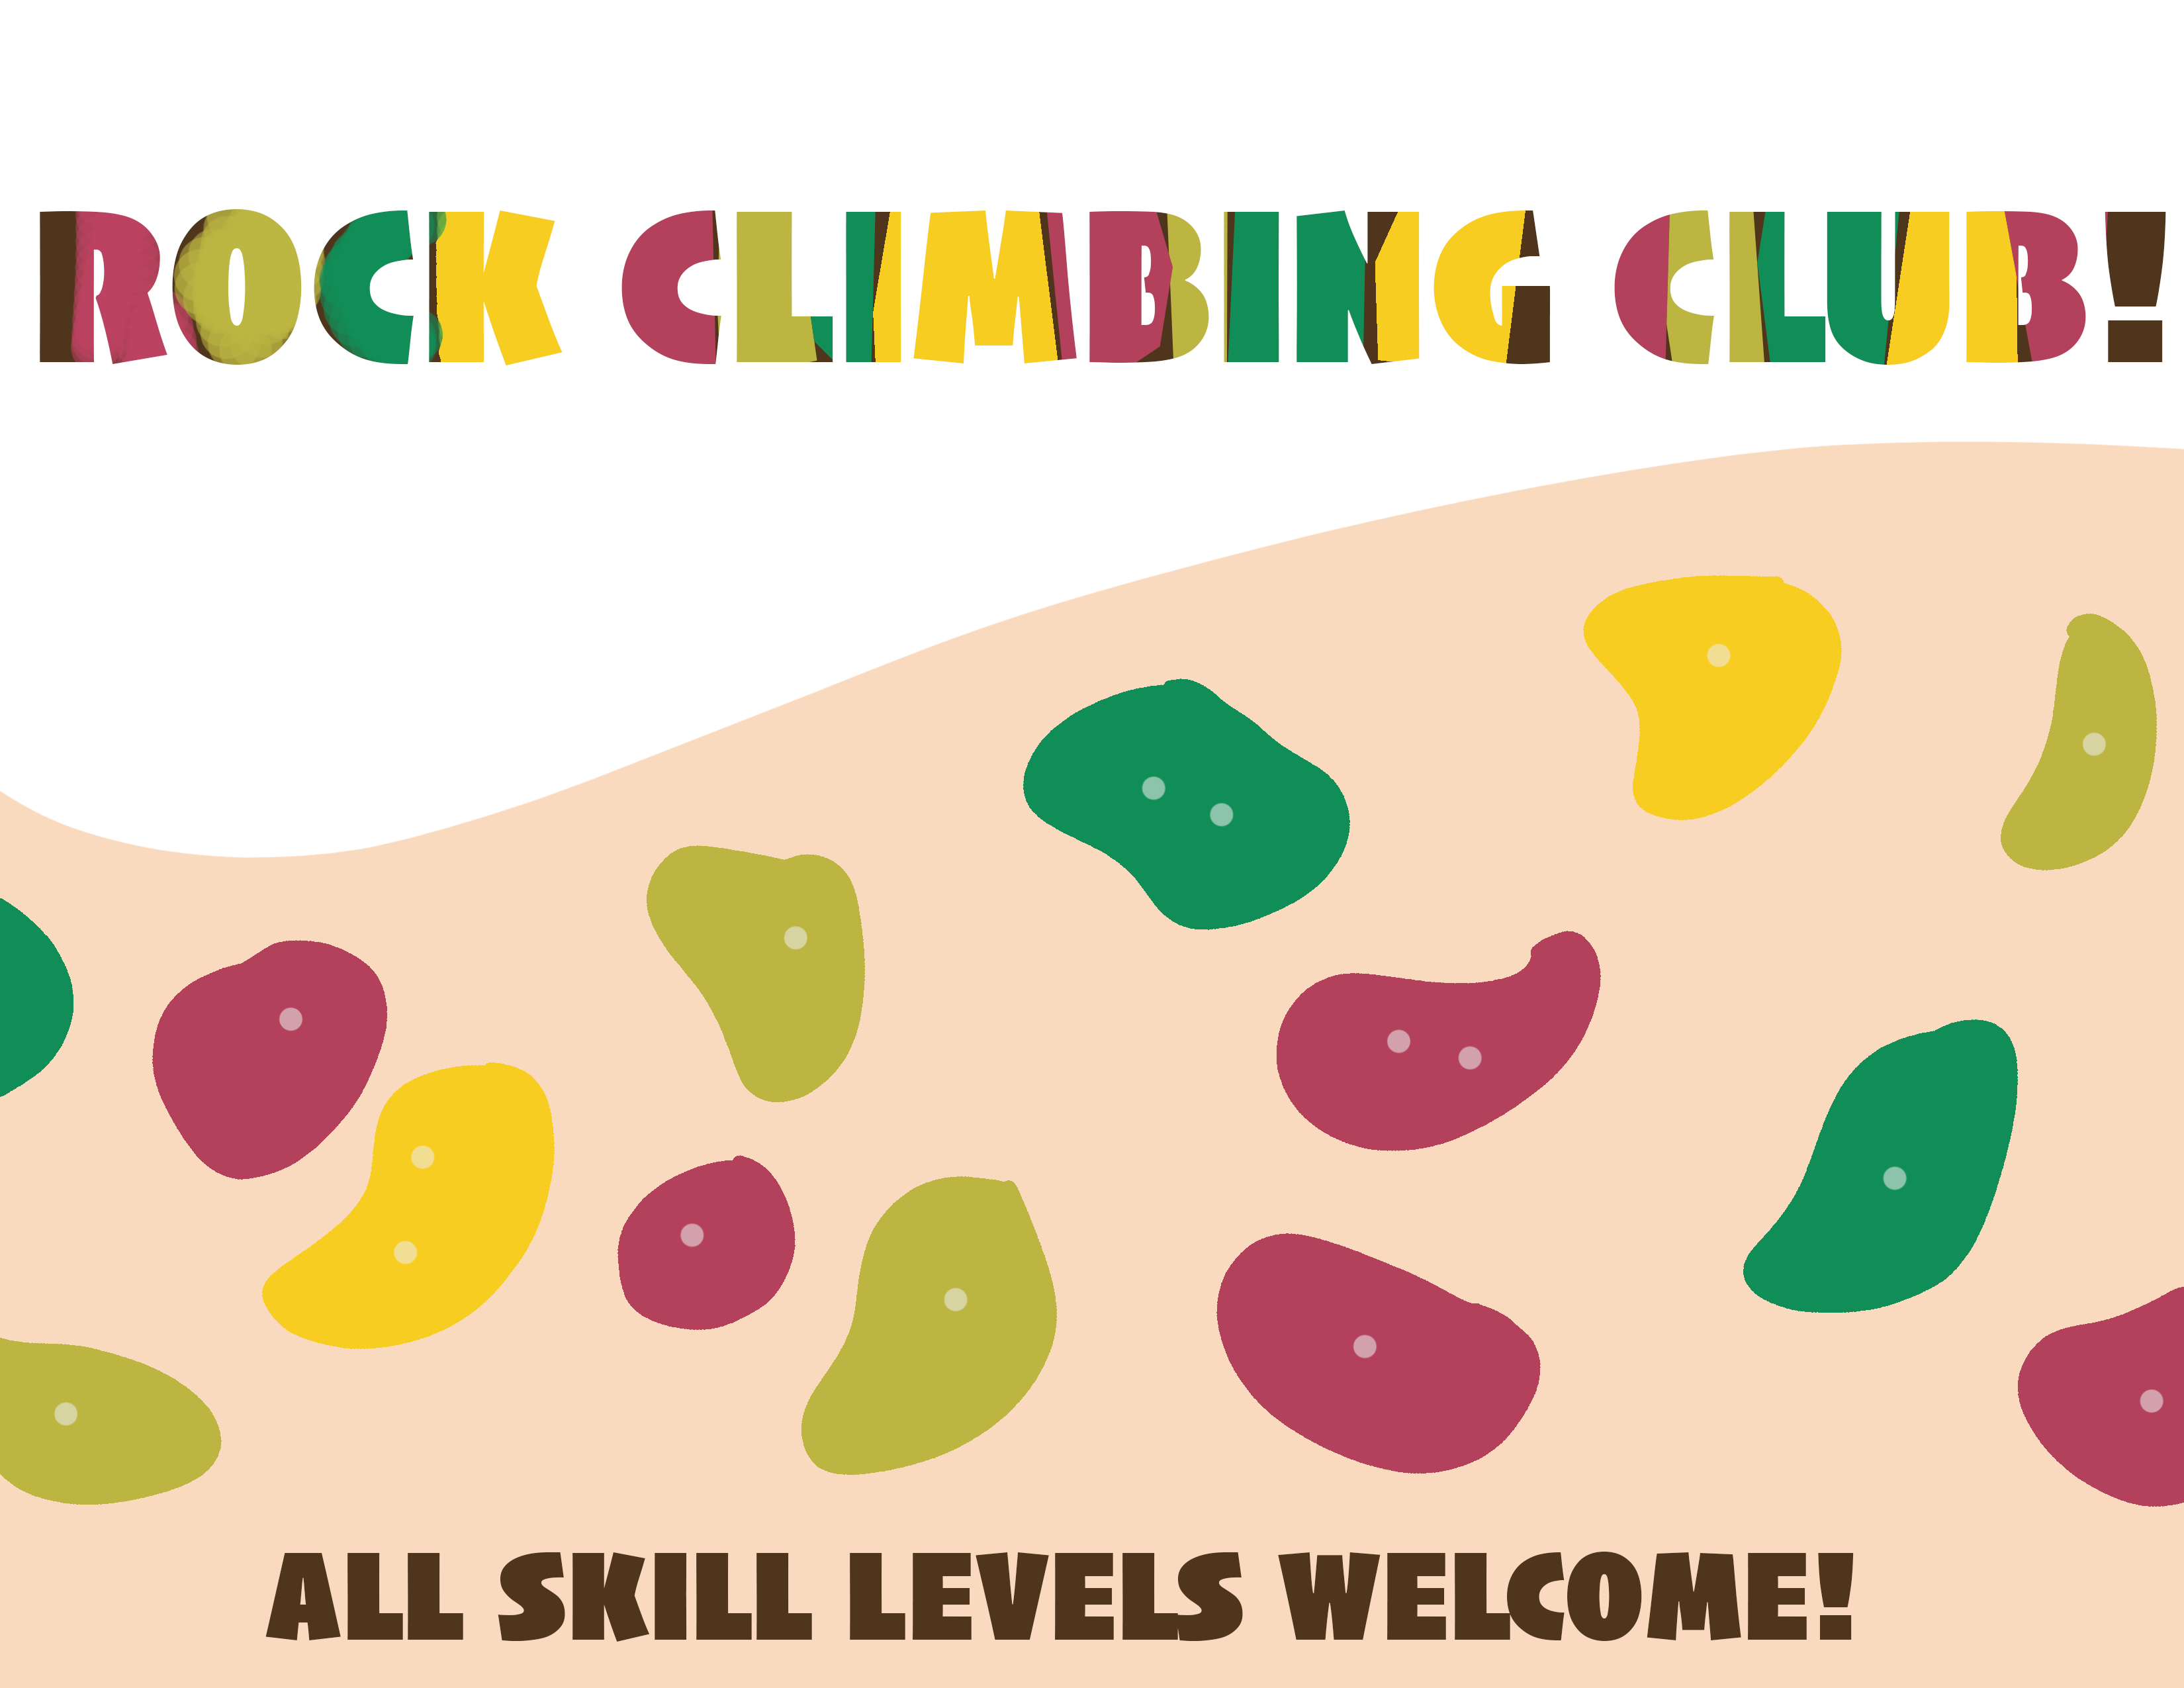 Come join the Rock Climbing Club at 6:30pm in front of the Castleton Rock Wall on Tuesday, September 19th!